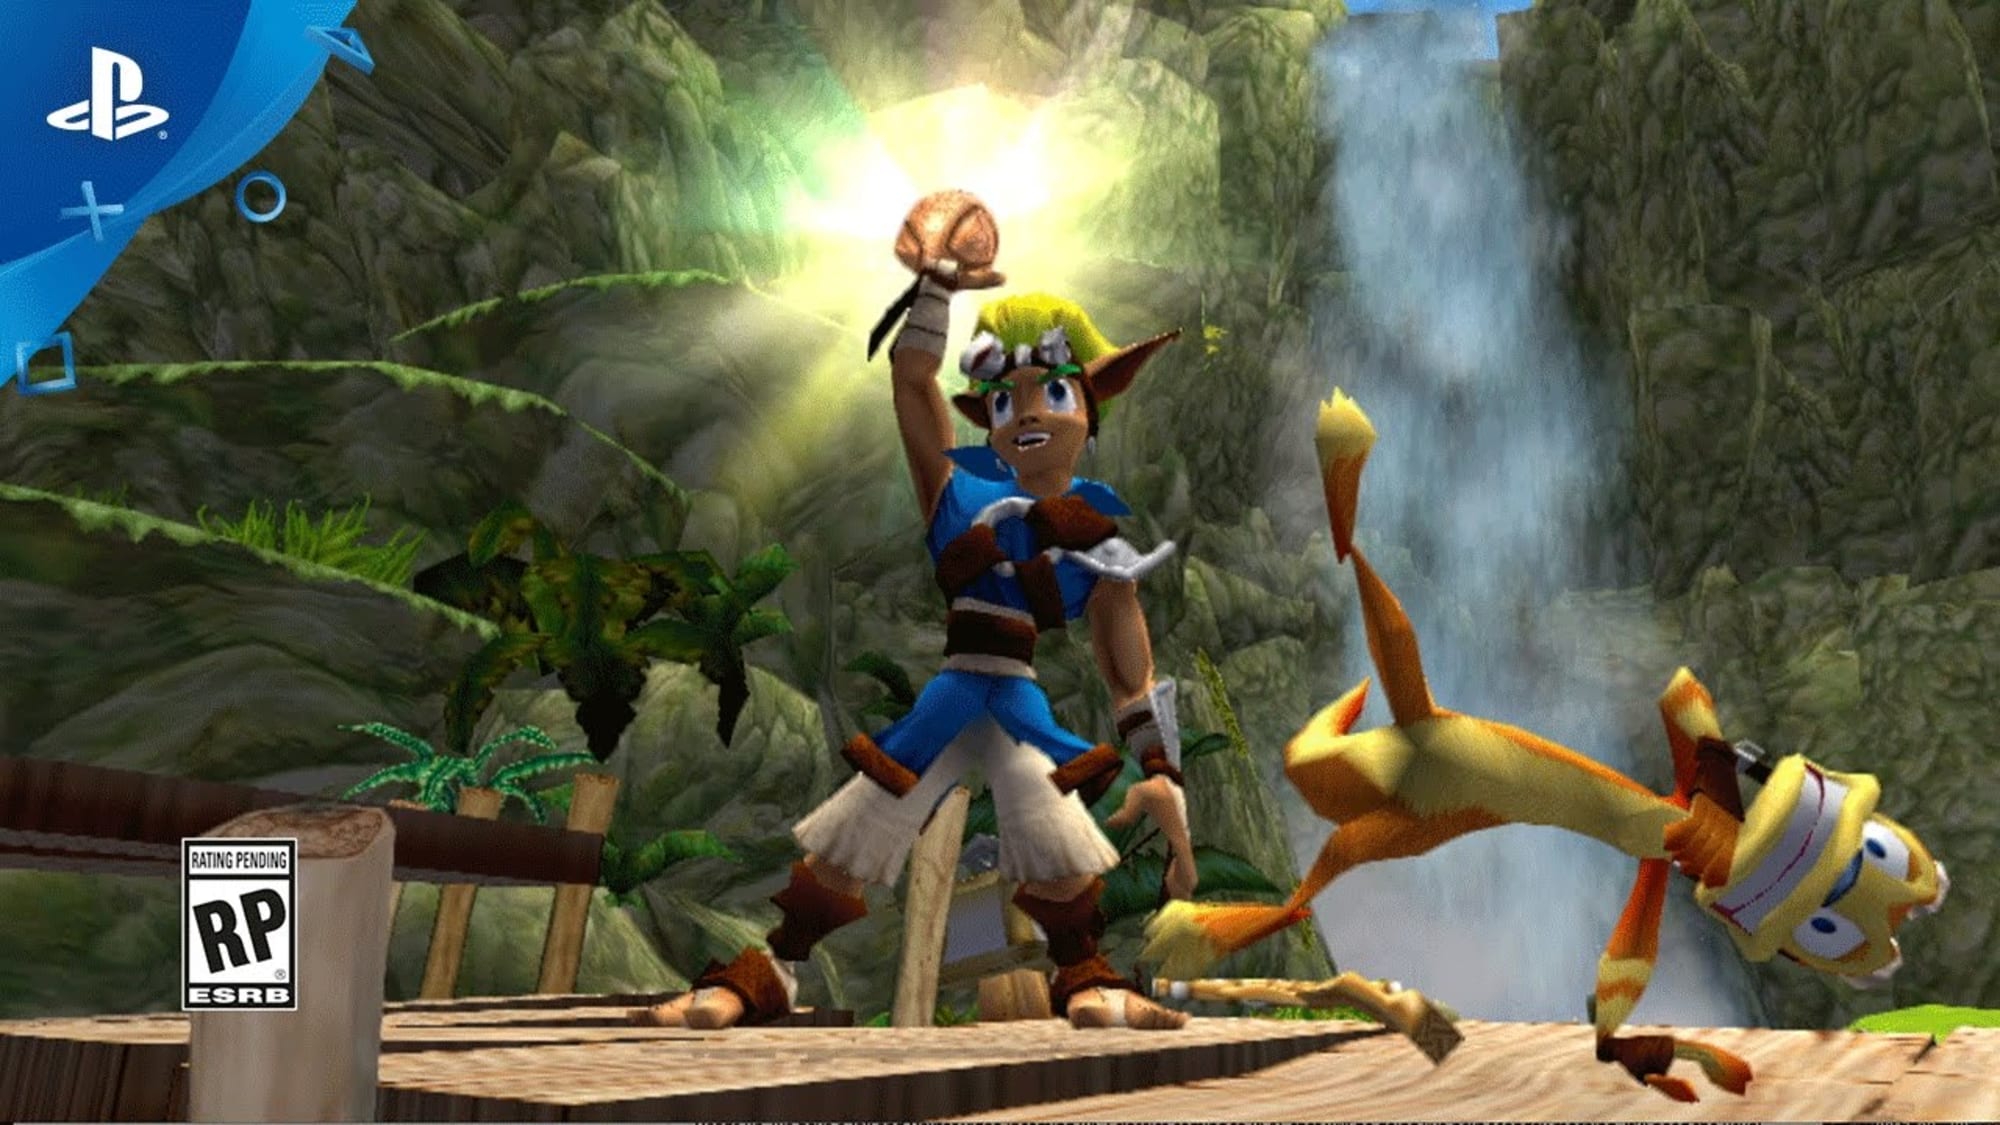 Game jack 2. Jak and Daxter ps2. Jak and Daxter 2. Jak and Daxter 4. Jak & Daxter плейстейшен 2.